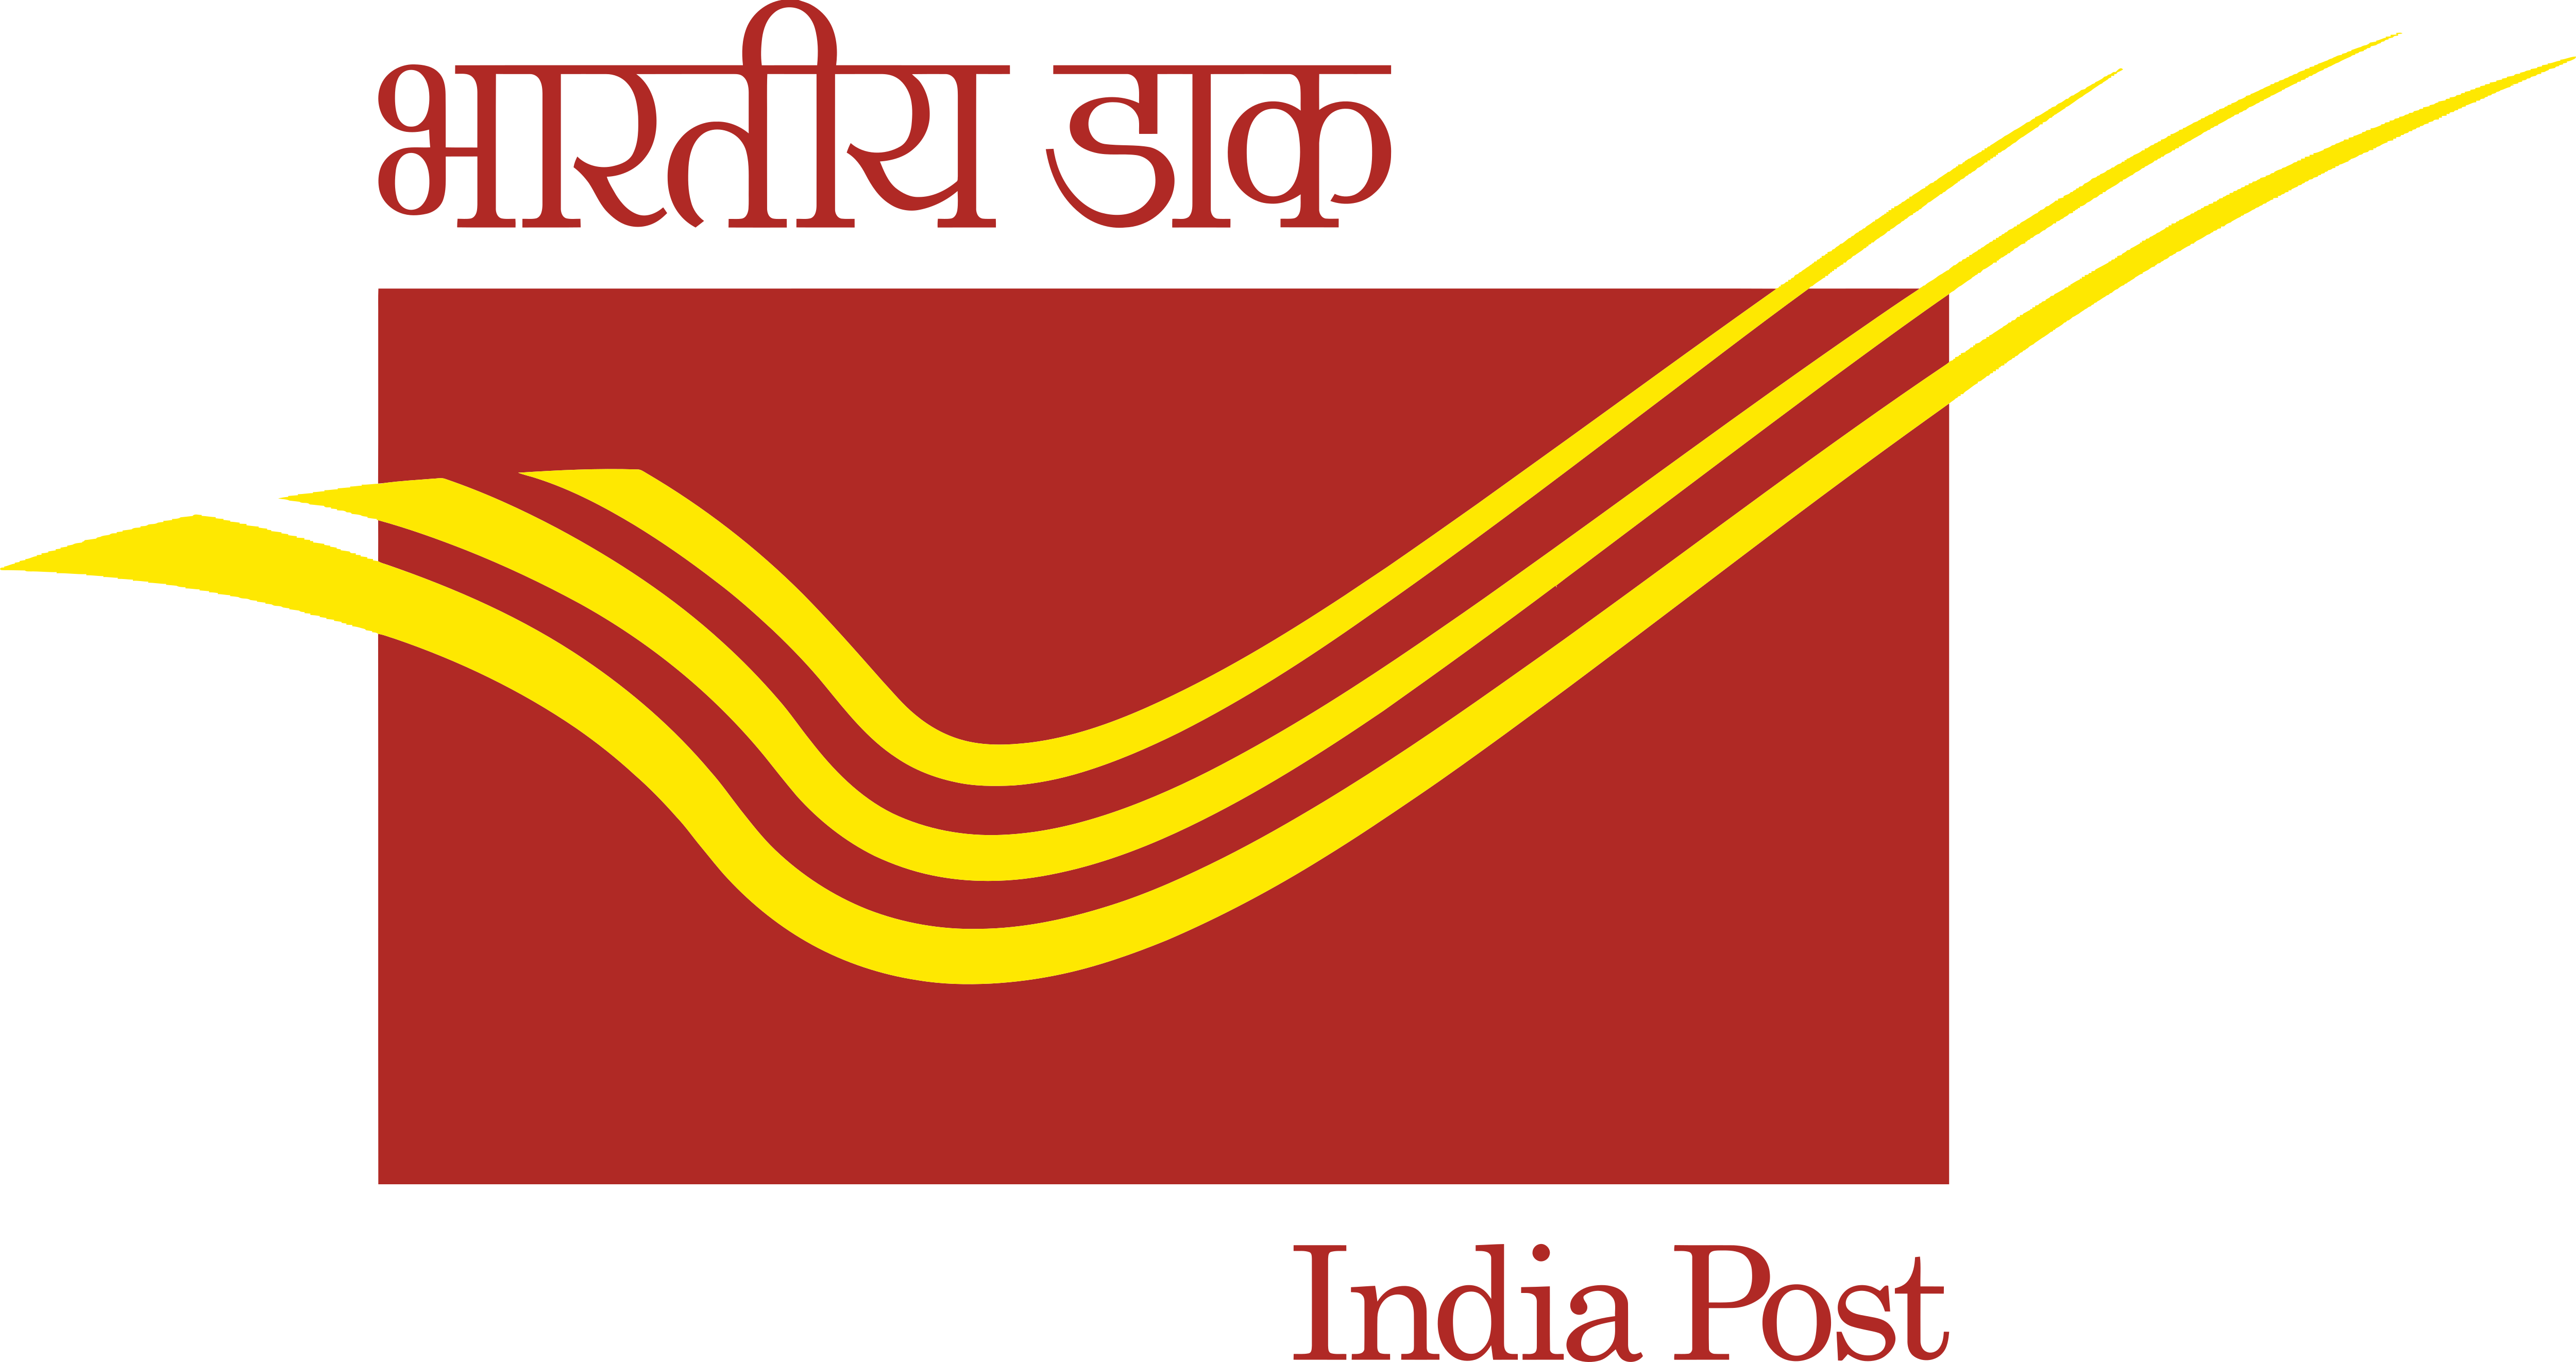 Indian Post Office Recruitment 2021